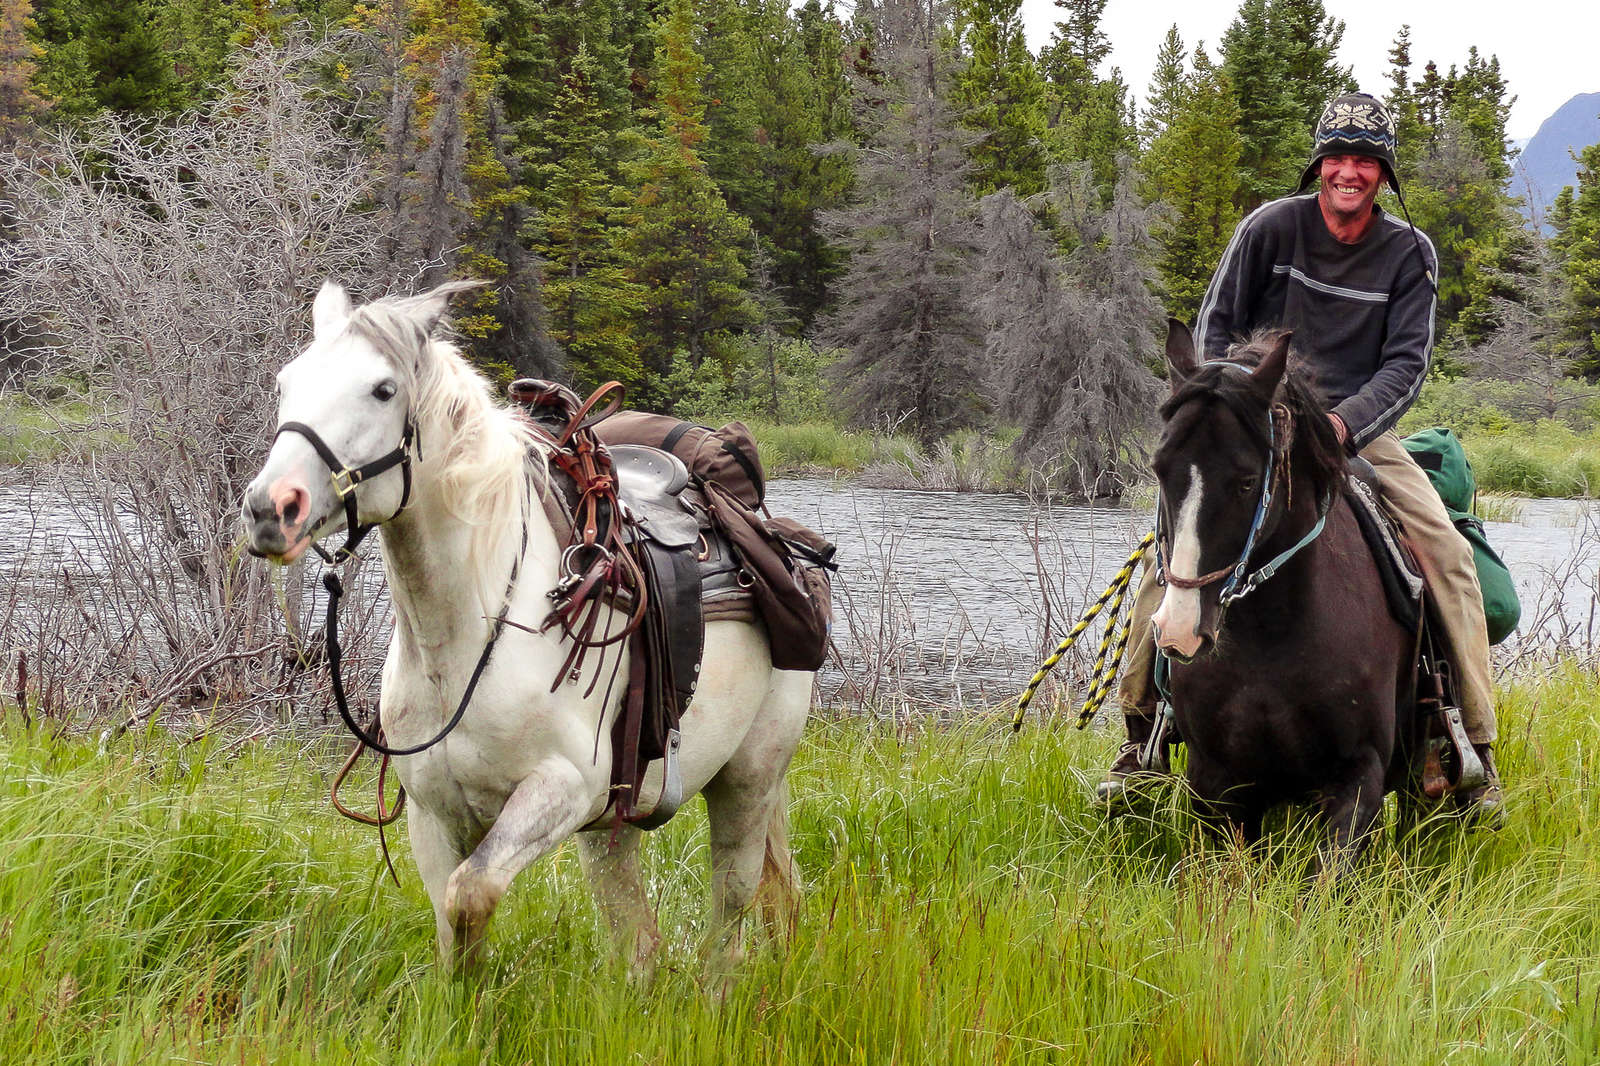 Journey into the wilds of Yukon on a horseback trail | Equus Journeys